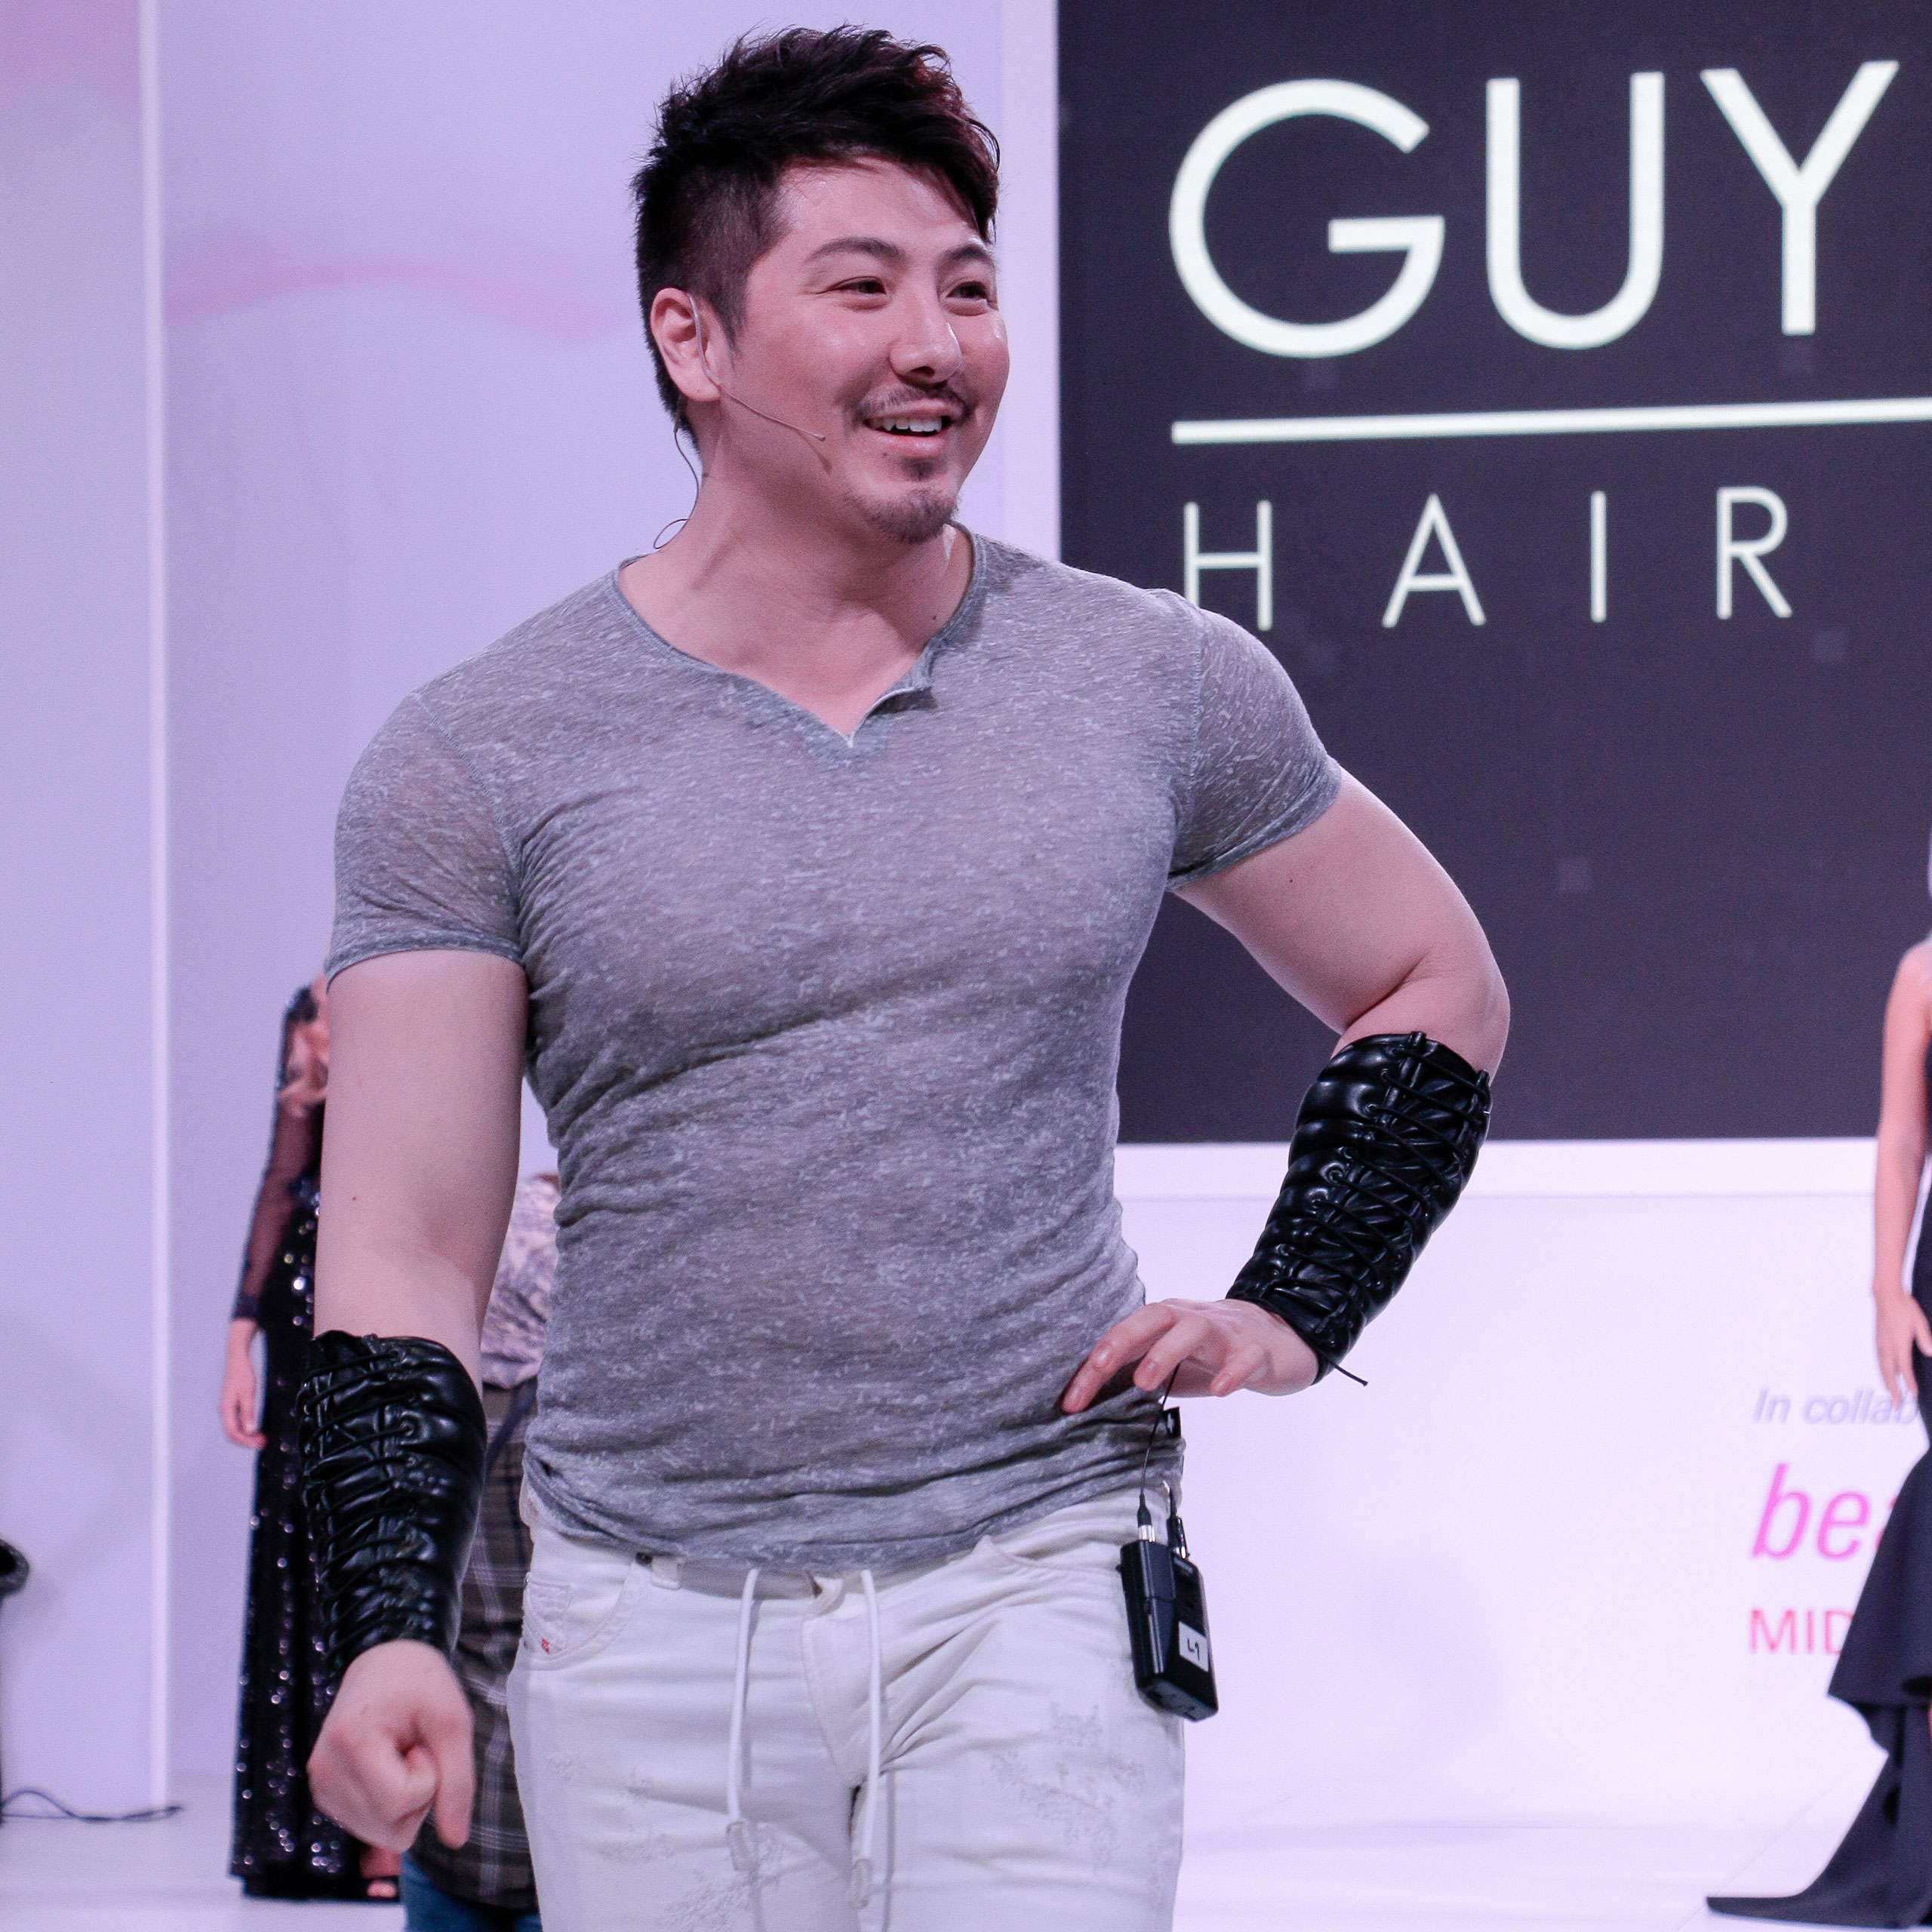 Beautyworld Middle East - Hollywood hair artist Guy Tang headlines star act of professional stylists at Beautyworld Middle East 2017